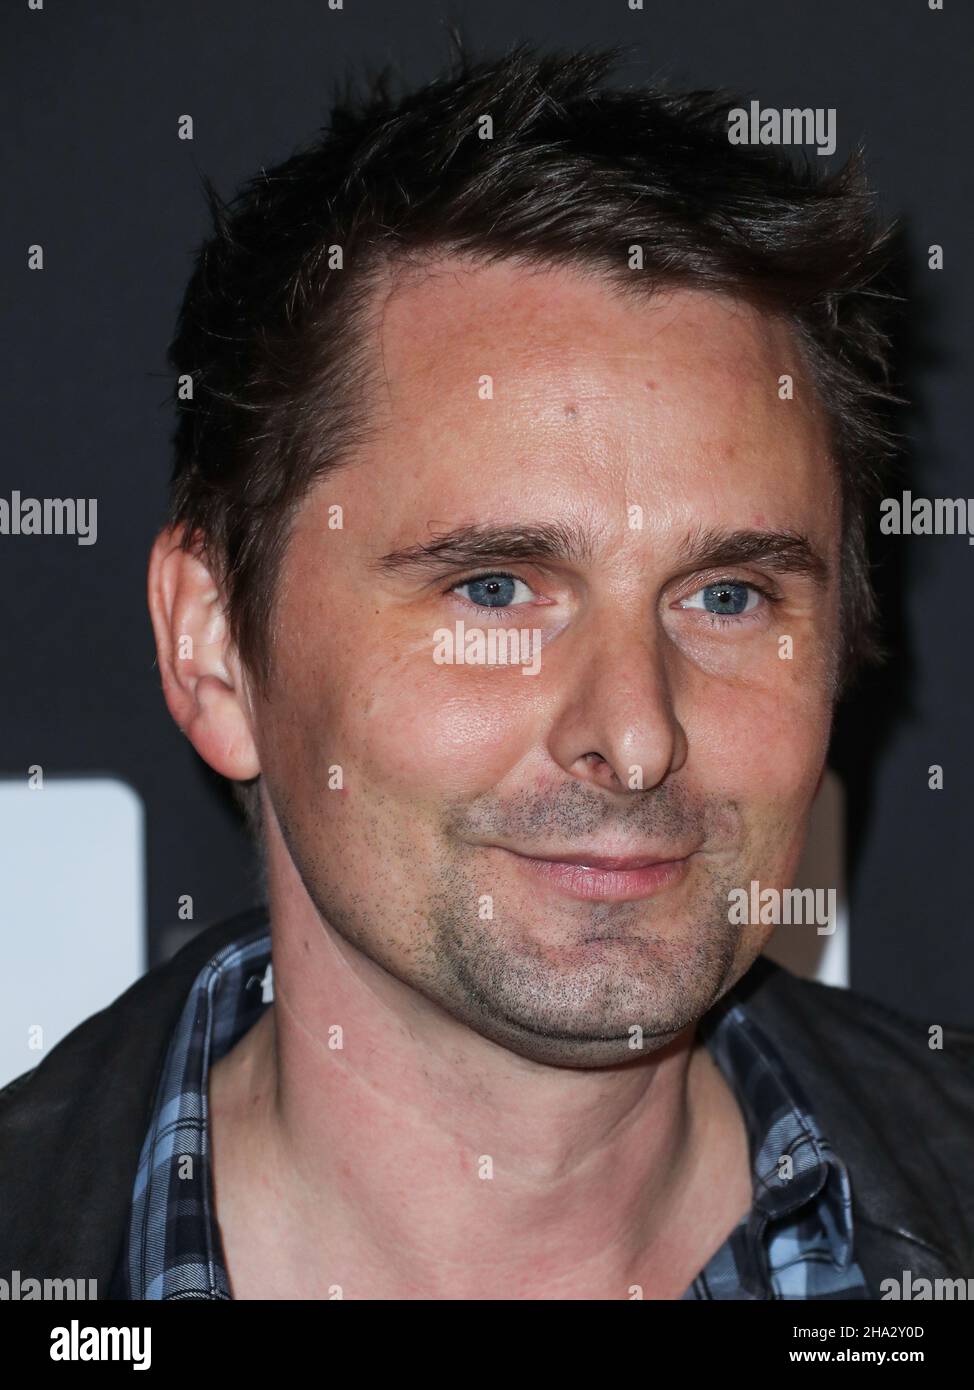 Hollywood, United States. 09th Dec, 2021. HOLLYWOOD, LOS ANGELES, CALIFORNIA, USA - DECEMBER 09: Singer Matt Bellamy of Muse arrives at the Flip Grand Launch Event Hosted by Grammy-Nominated Artist Halsey with Performances by Scout Willis, BIA, and Kehlani held at Avalon Hollywood on December 9, 2021 in Hollywood, Los Angeles, California, United States. (Photo by Xavier Collin/Image Press Agency) Credit: Image Press Agency/Alamy Live News Stock Photo